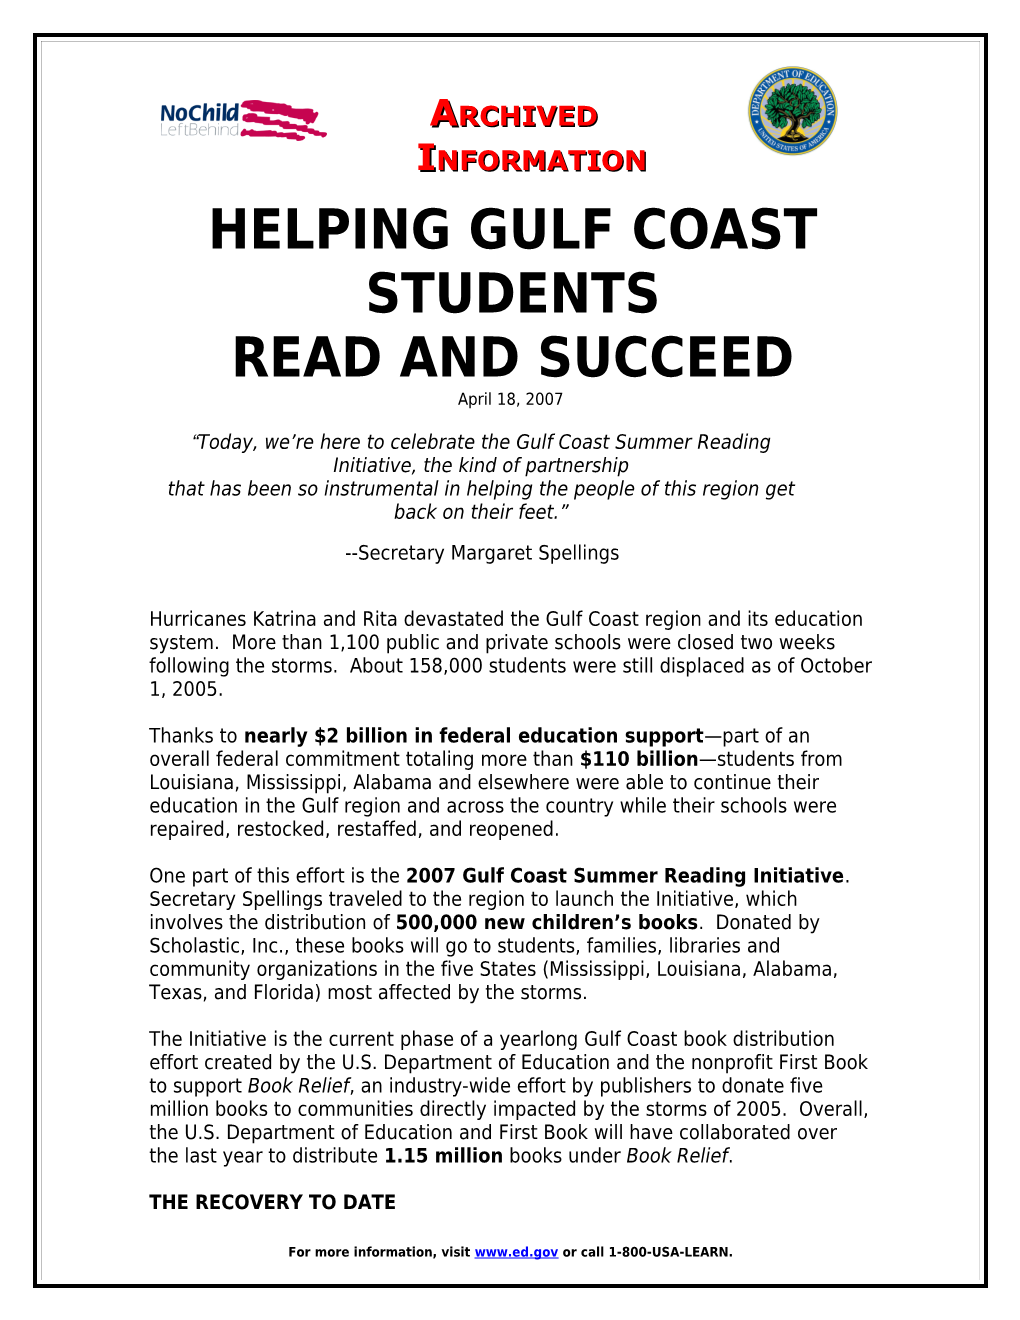 Archived: Helping Gulf Coast Students Read and Succeed April 2007 (Msword)